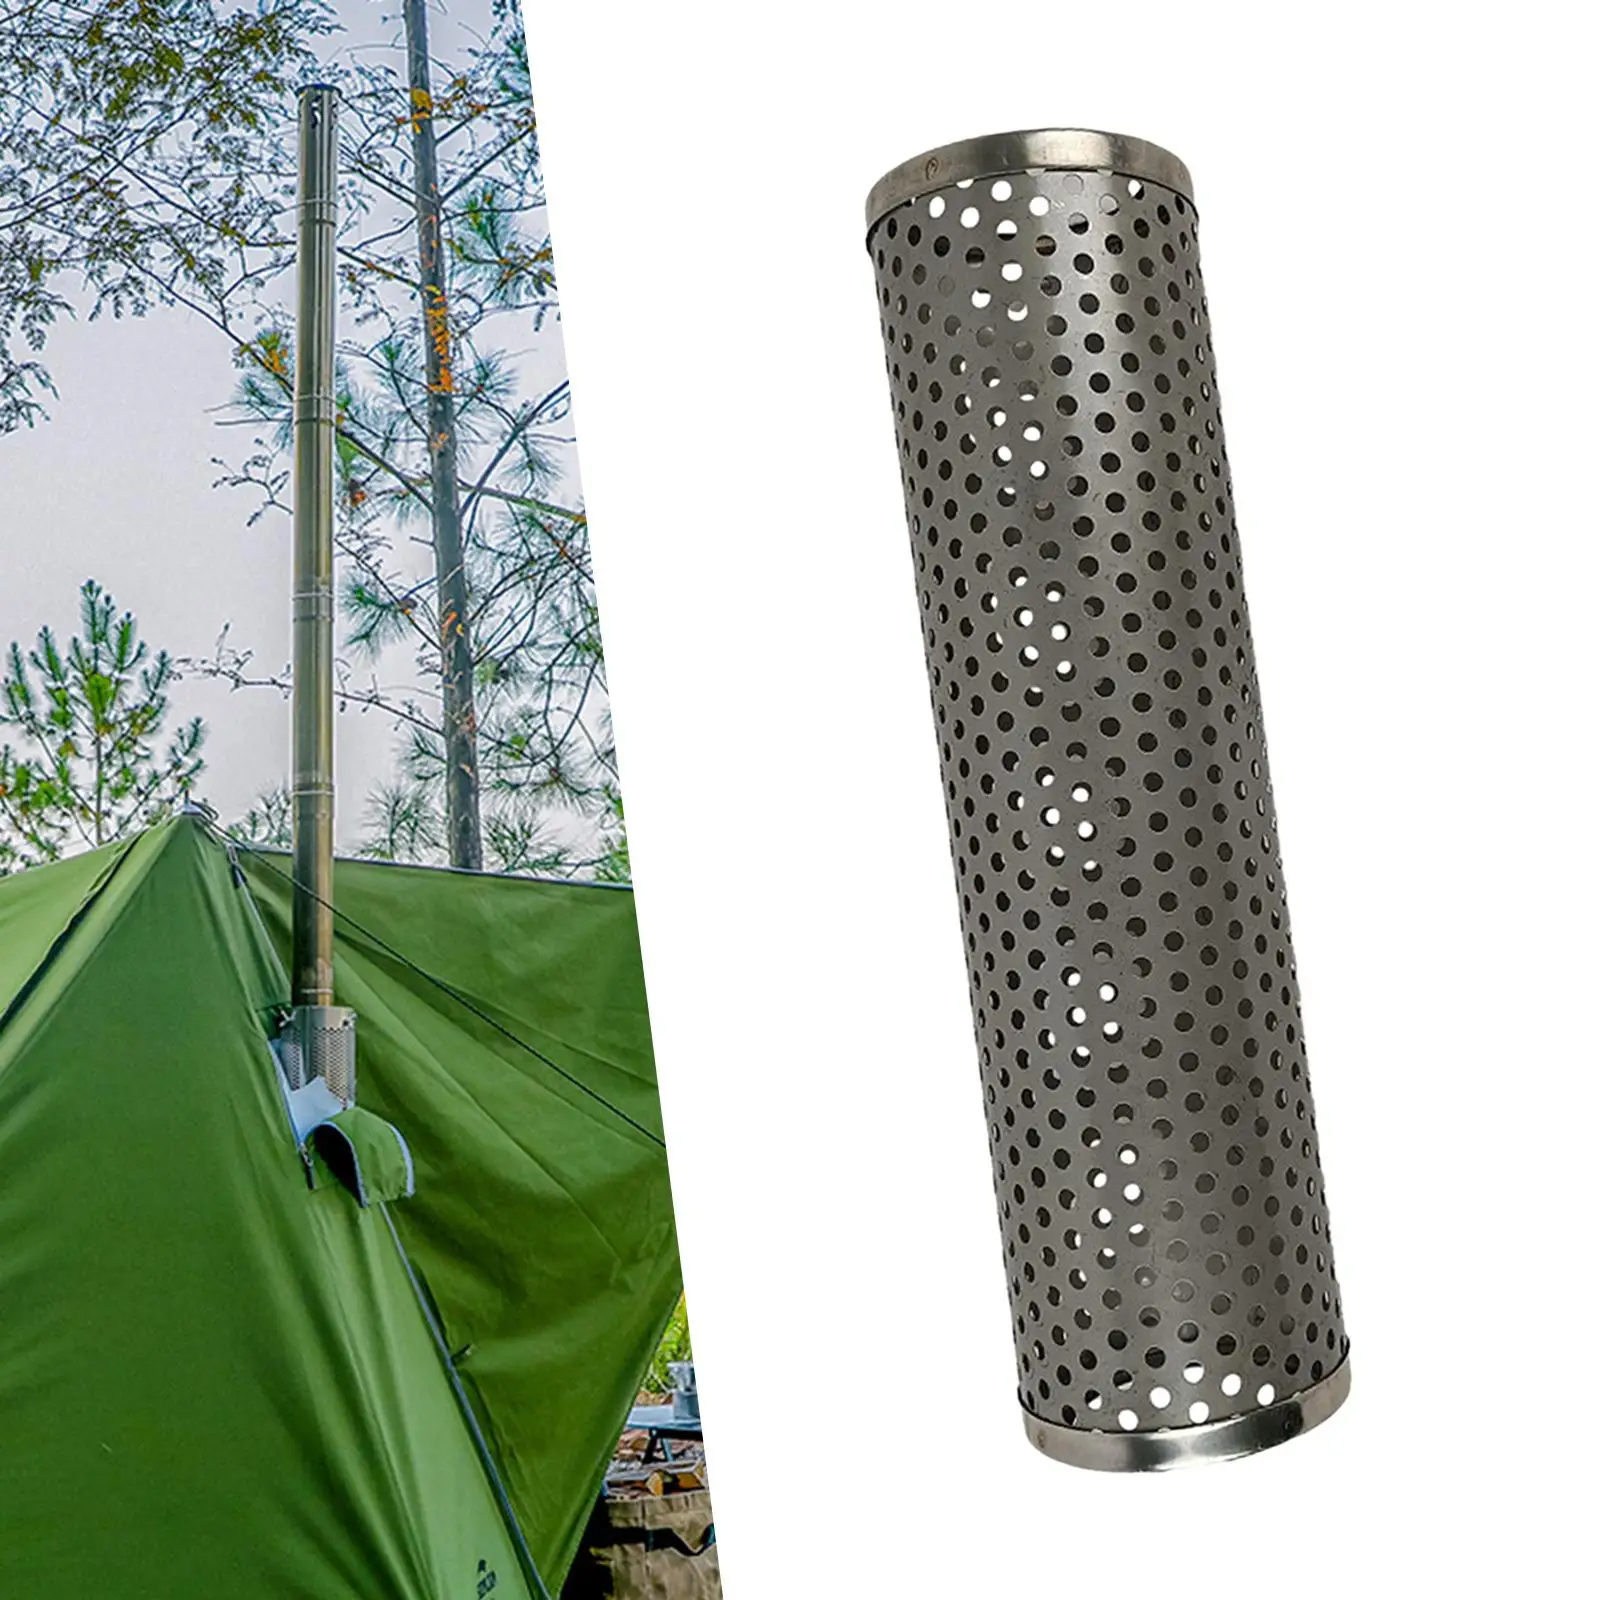 Stove Chimney Pipe Cover Durable Flue Protector Anti Scalding Net for Heating Stove Outdoor Hiking Hot Tent Stove Winter Heater